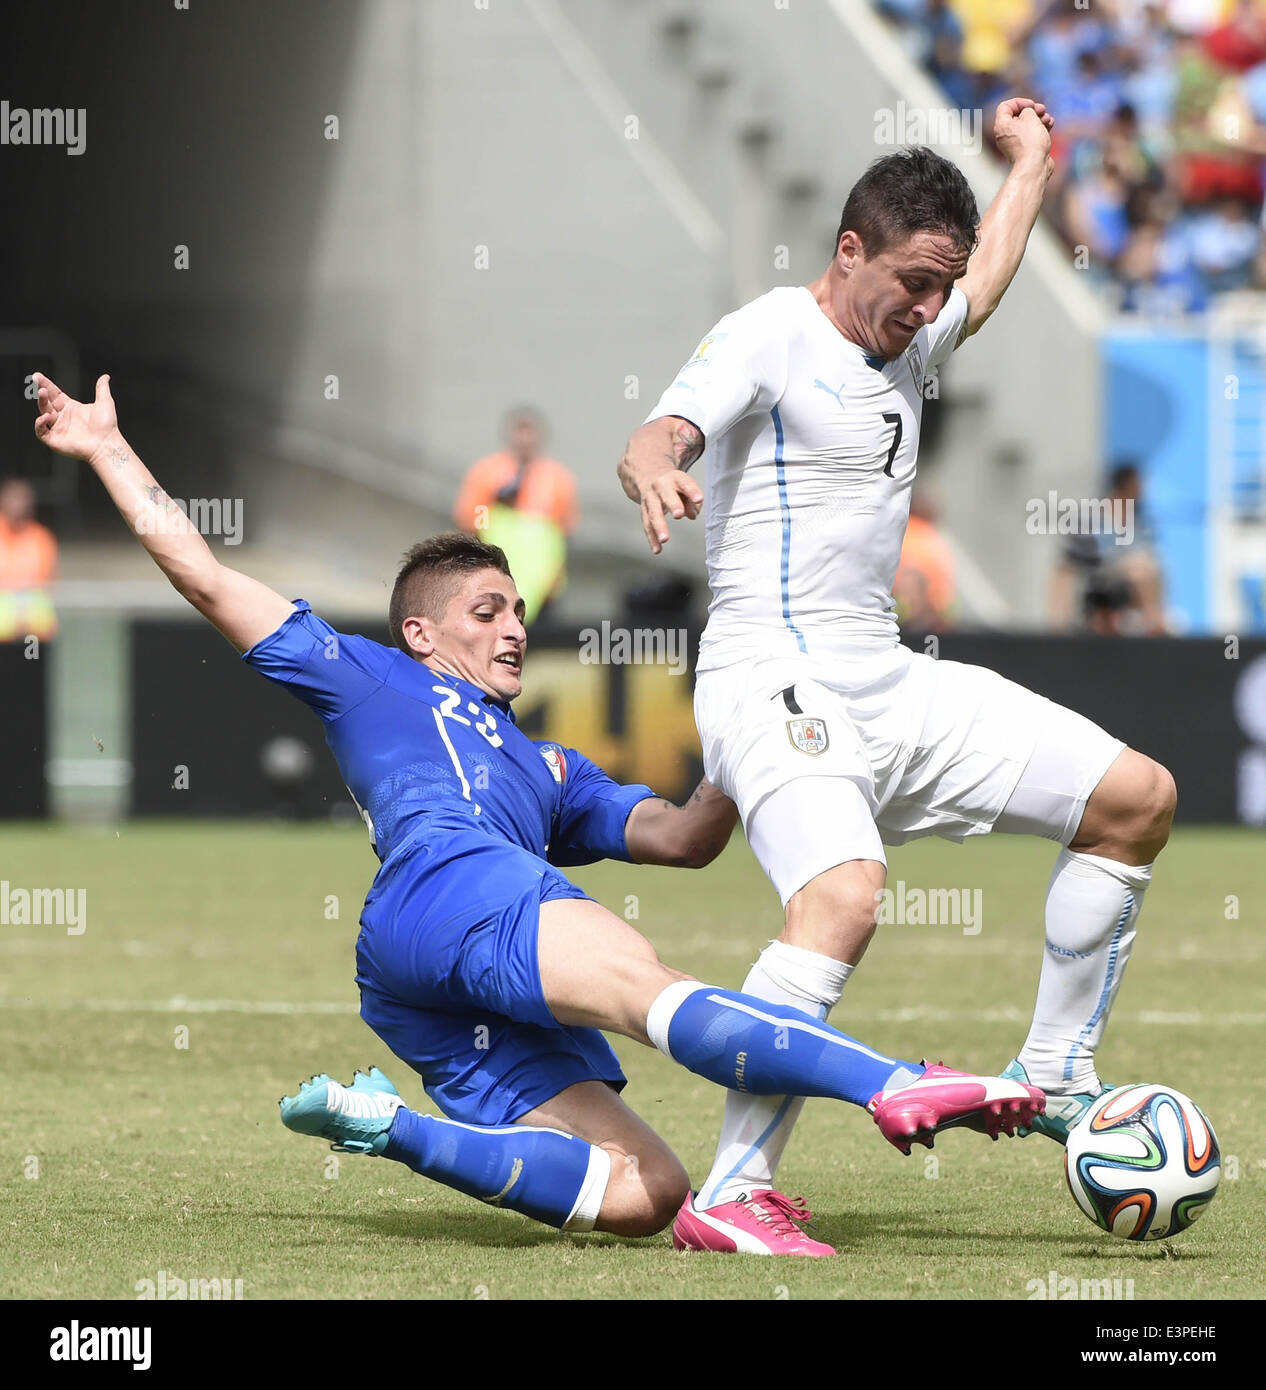 Natal, Brazil. 24th June, 2014. Italy's Marco Verratti vies with Uruguay's Cristian Rodriguez during a Group D match between Italy and Uruguay of 2014 FIFA World Cup at the Estadio das Dunas Stadium in Natal, Brazil, June 24, 2014. © Lui Siu Wai/Xinhua/Alamy Live News Stock Photo